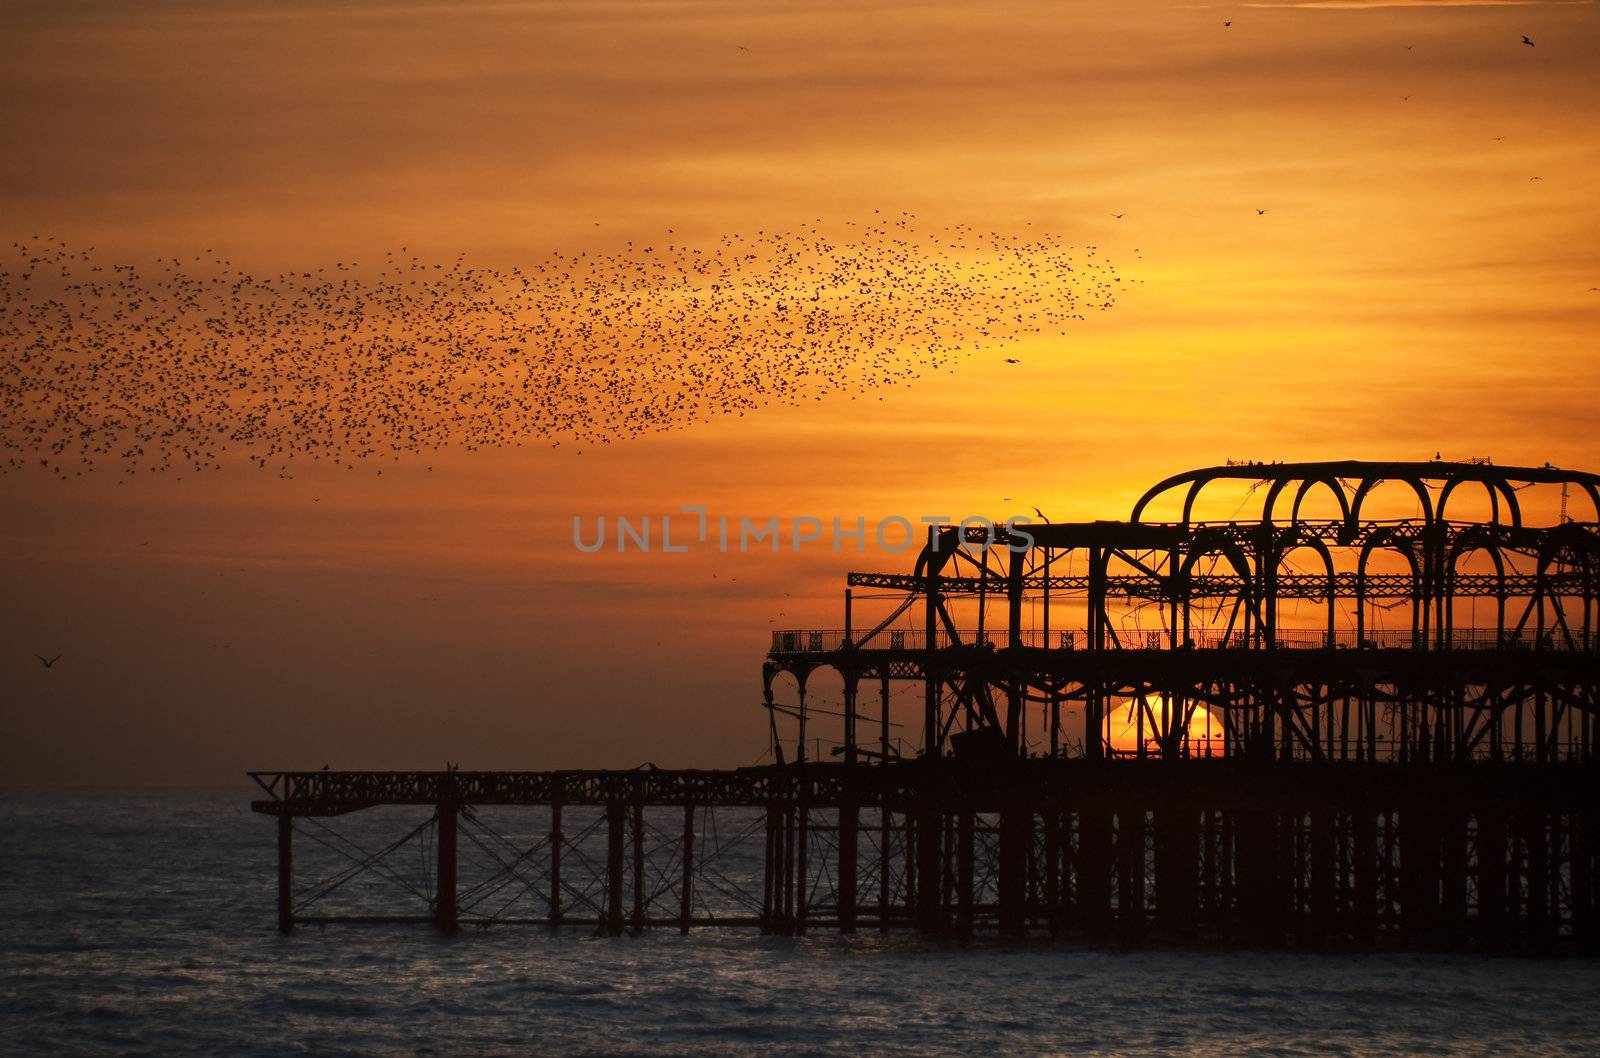 Flock of starlings over the West Pier at sunset, Brighton, UK